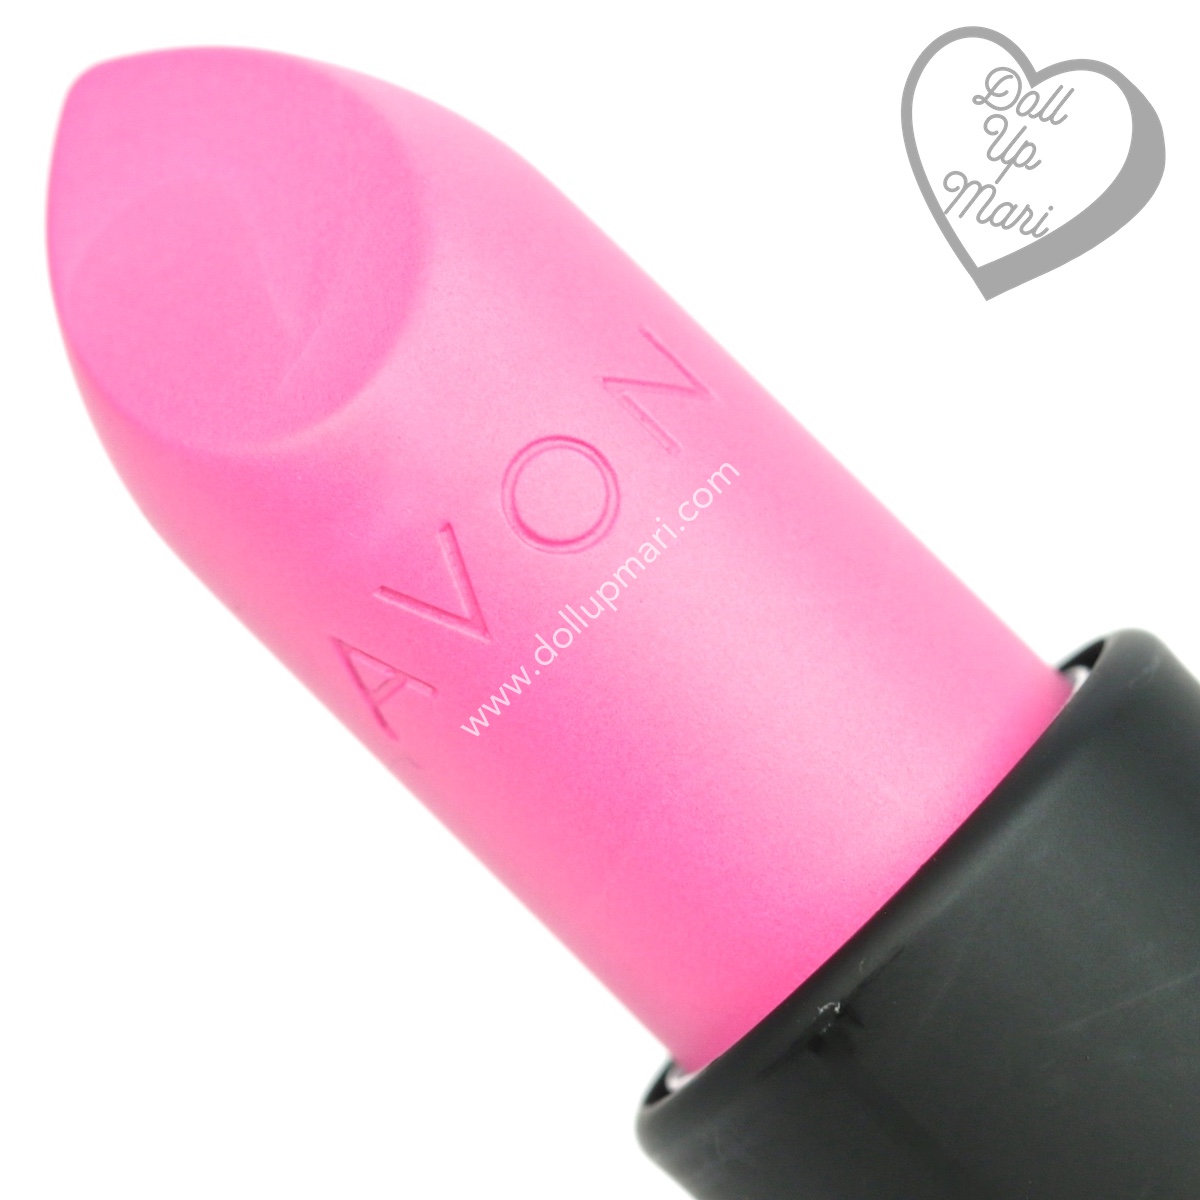 Zoom in of Electric Pink shade of AVON Perfectly Matte Lipstick